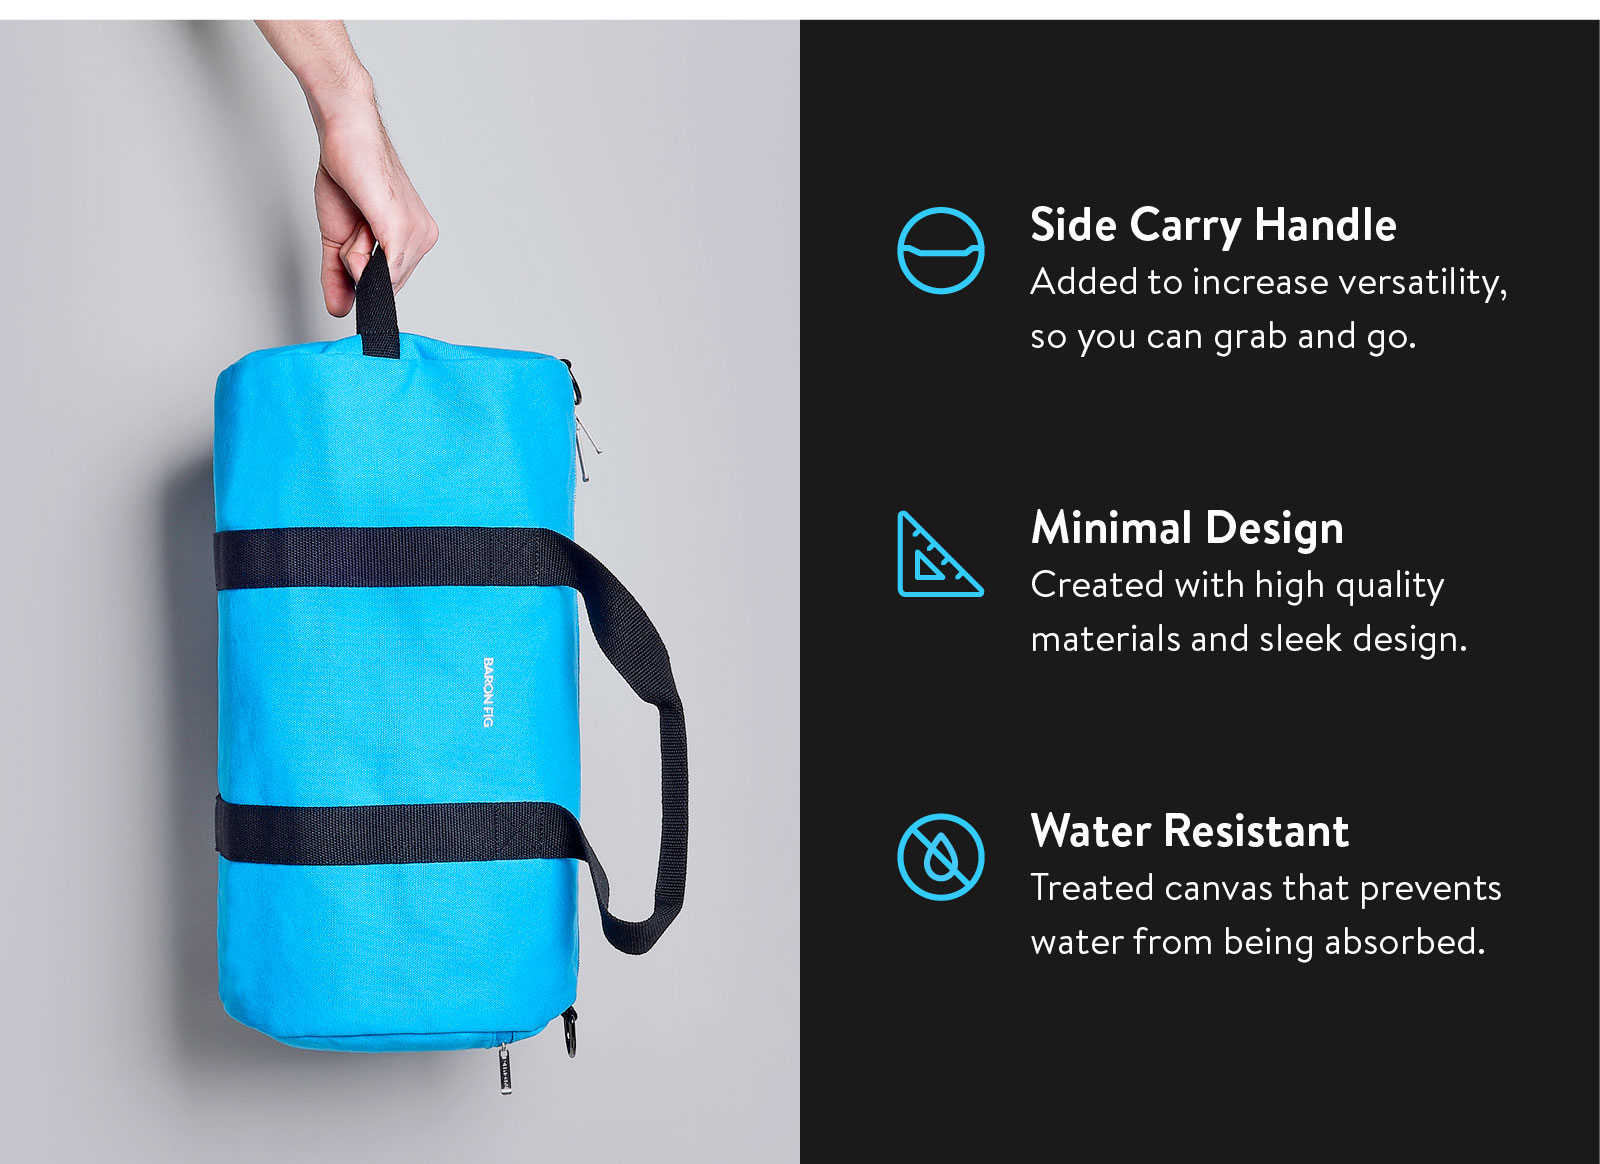 Side carry handle. Minimal design. Water resistant. See more ?